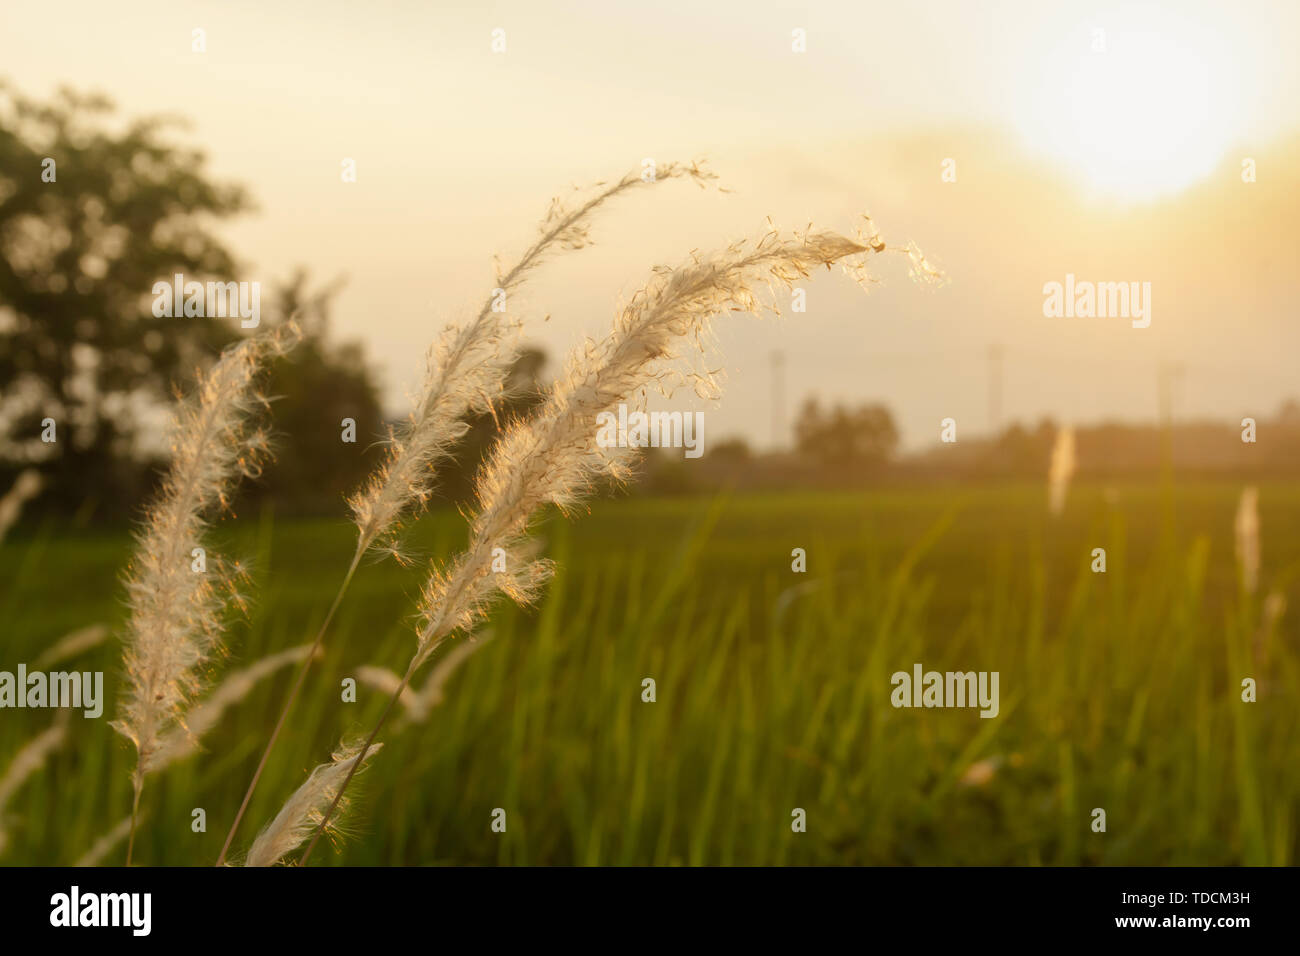 Poaceae grass flower. Imperata cylindica (L.) P. Beauv, poaceae (GRAMINEAE) in the rays of the rising sunset background. Stock Photo